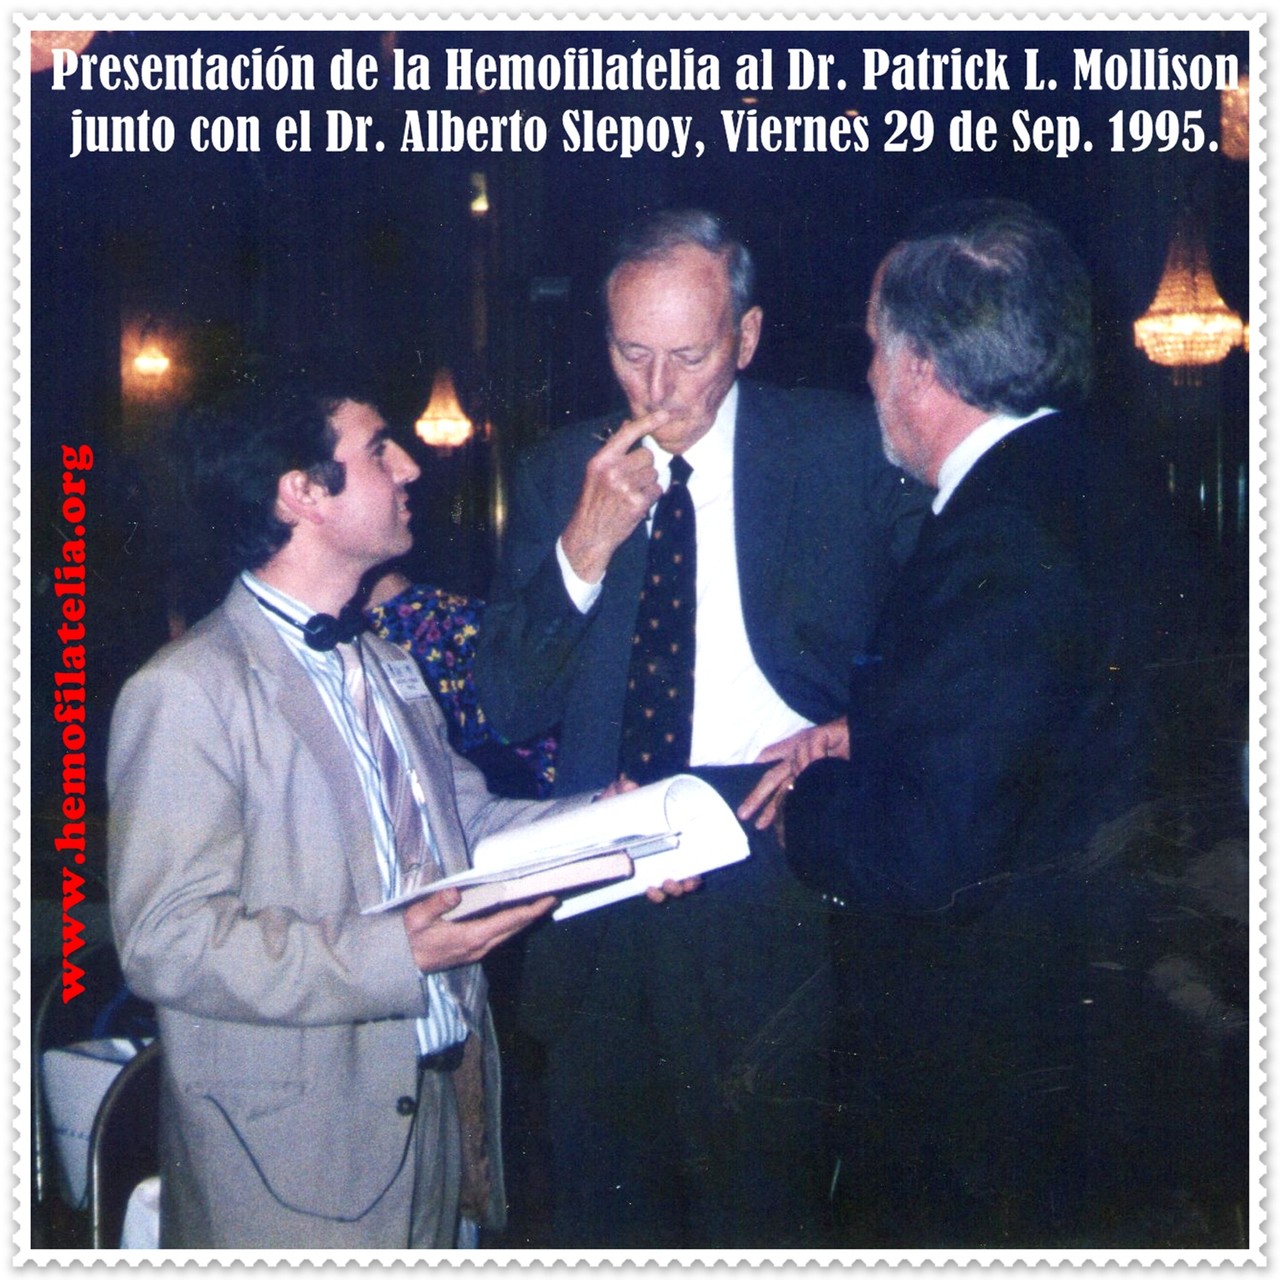 Introducing the Blood-Philately Dr. Patrick L. Mollison with Dr. Alberto Slepoy, Friday September 29, 1995.